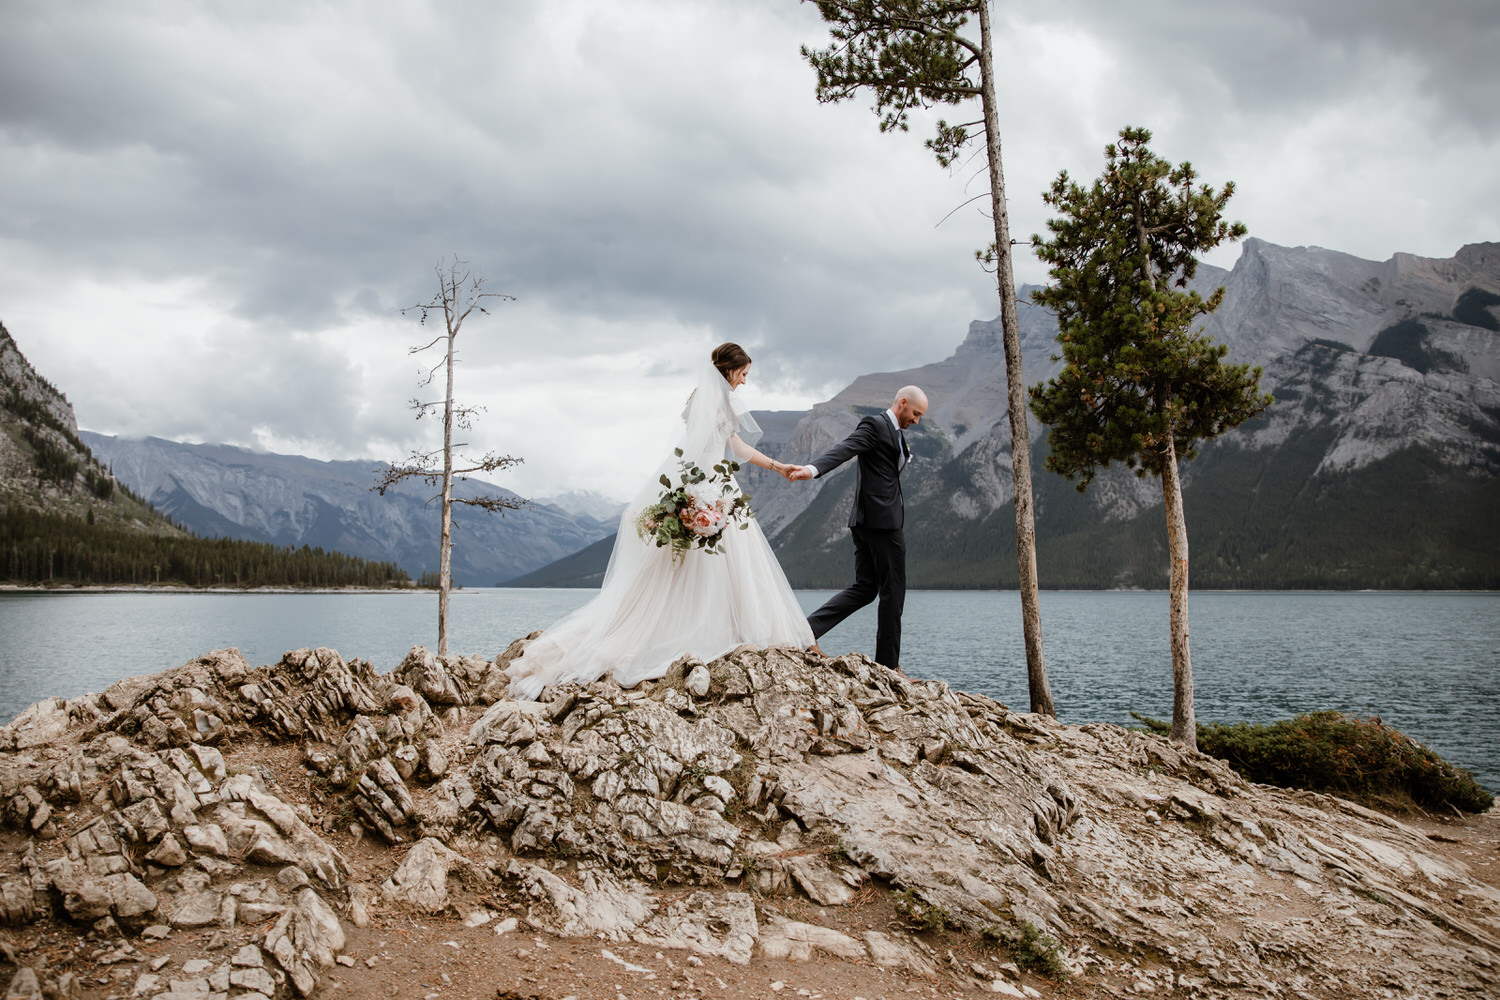 Elopement – Is it right for you?